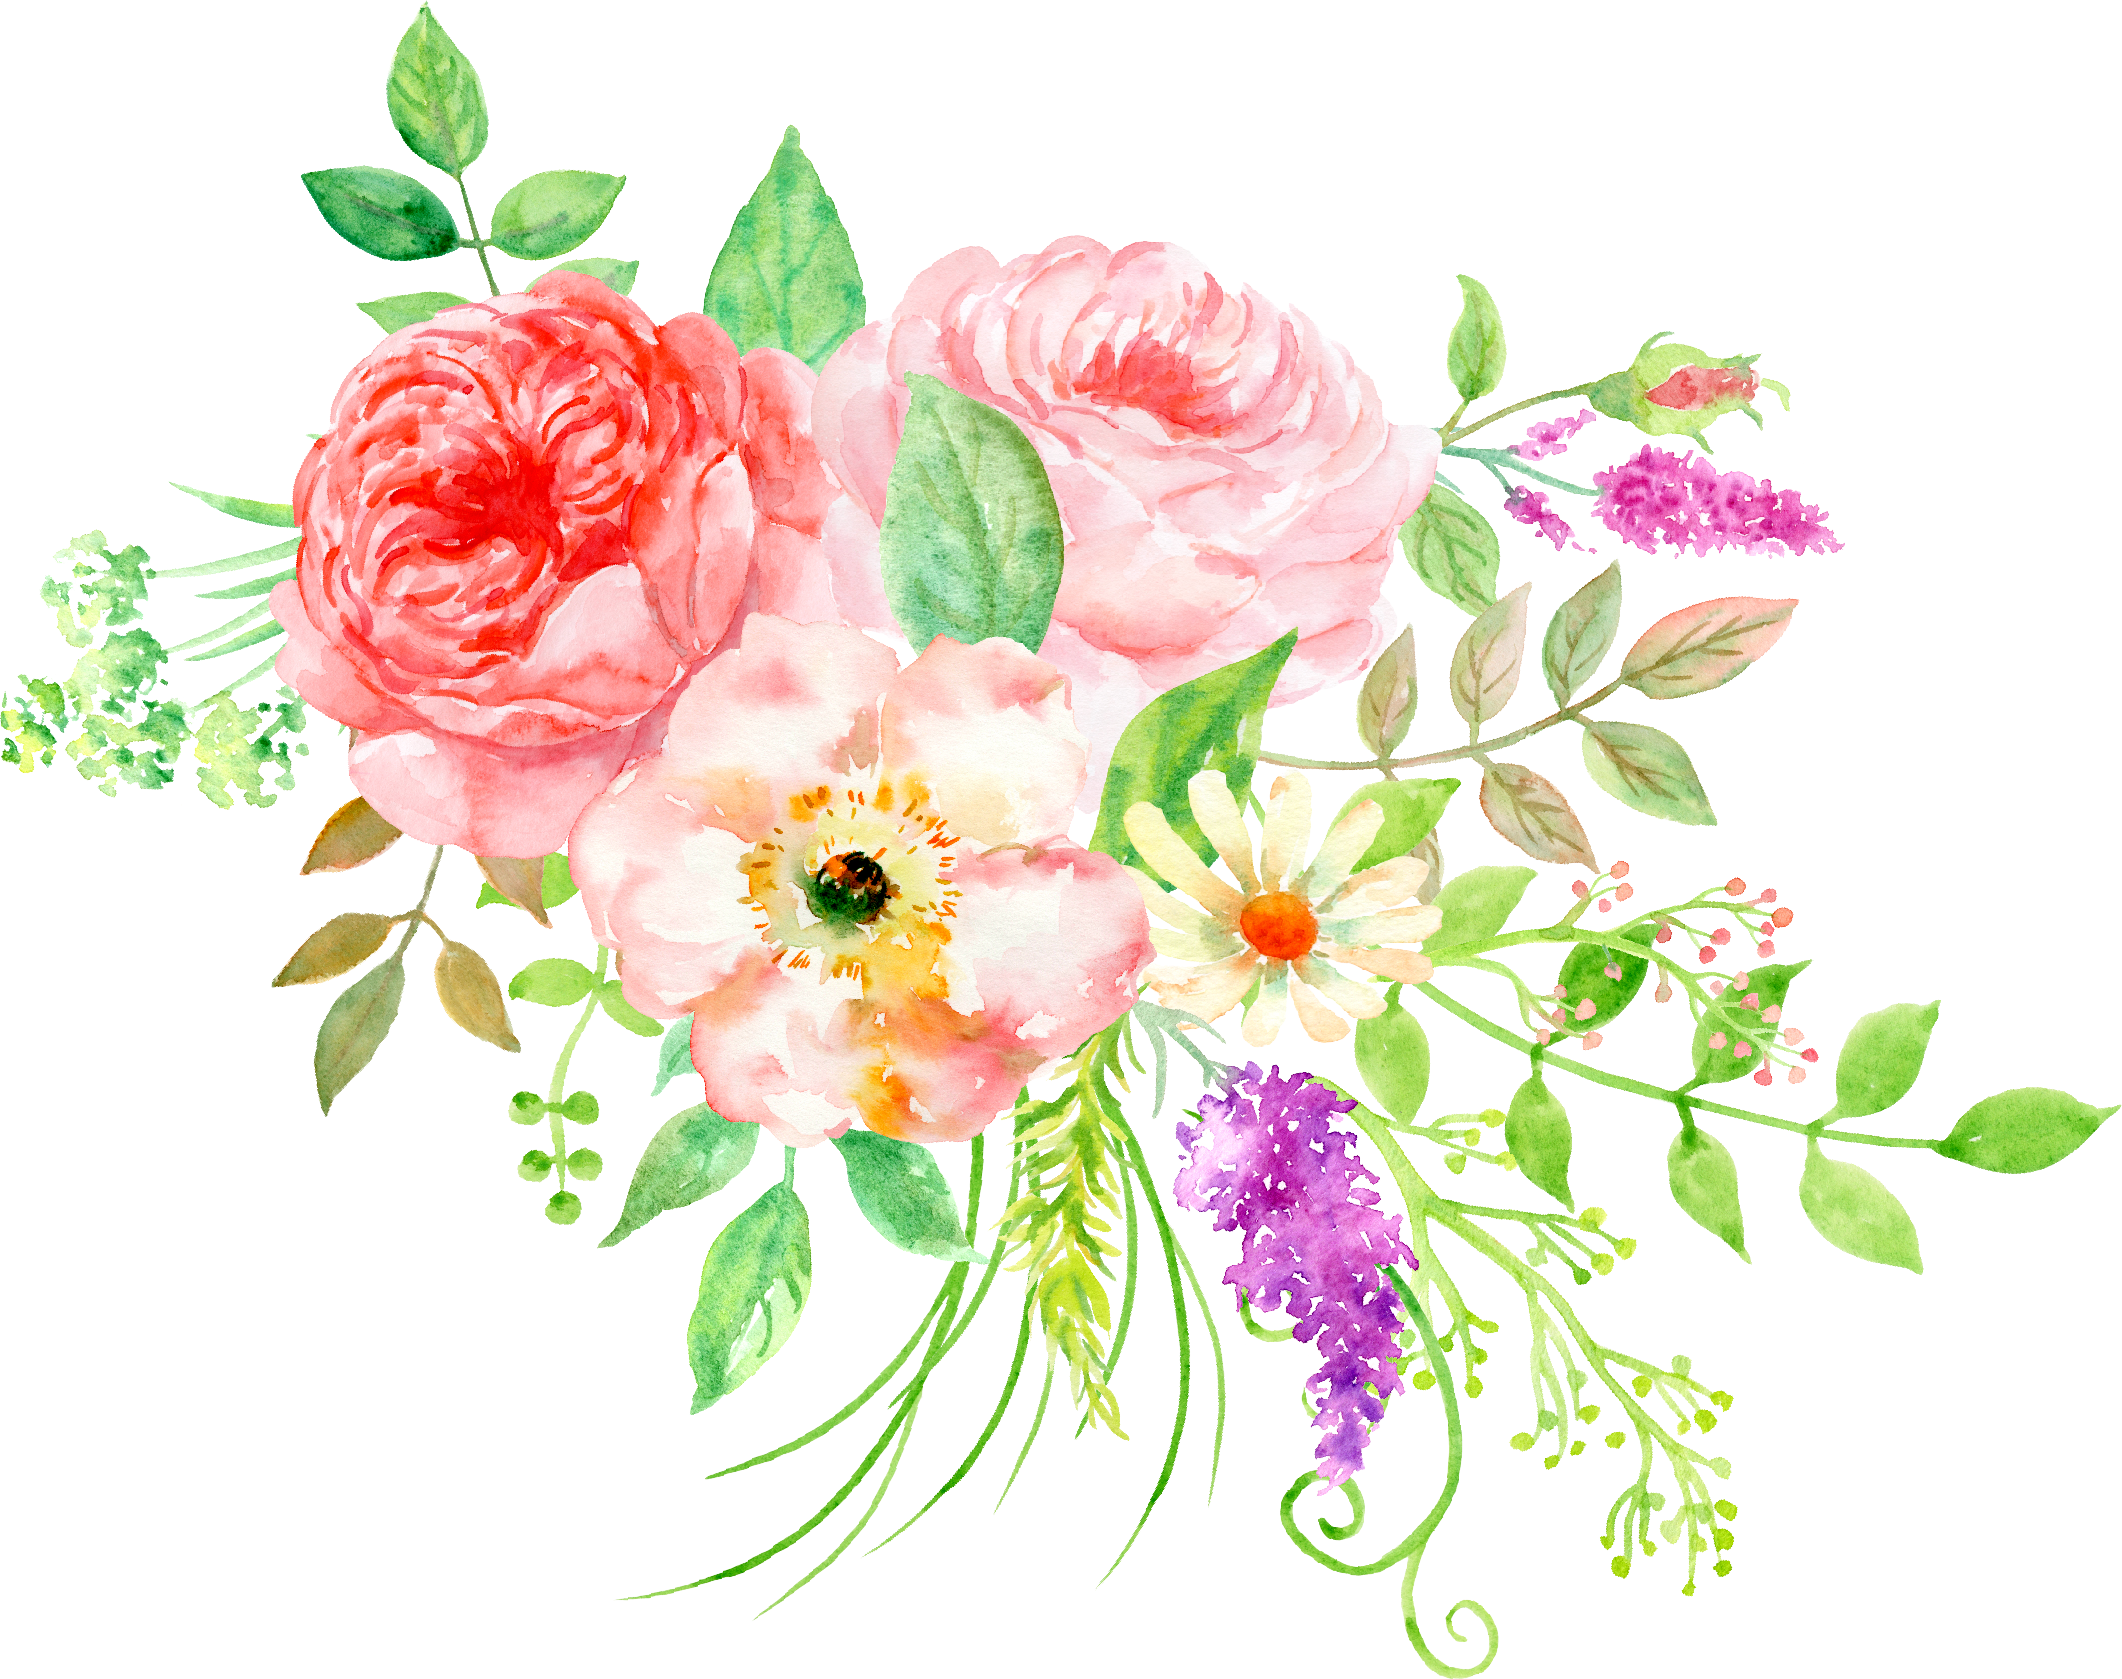 Flower Watercolor Painting Floral Design - Flower Watercolor Painting Floral Design (2122x1679)